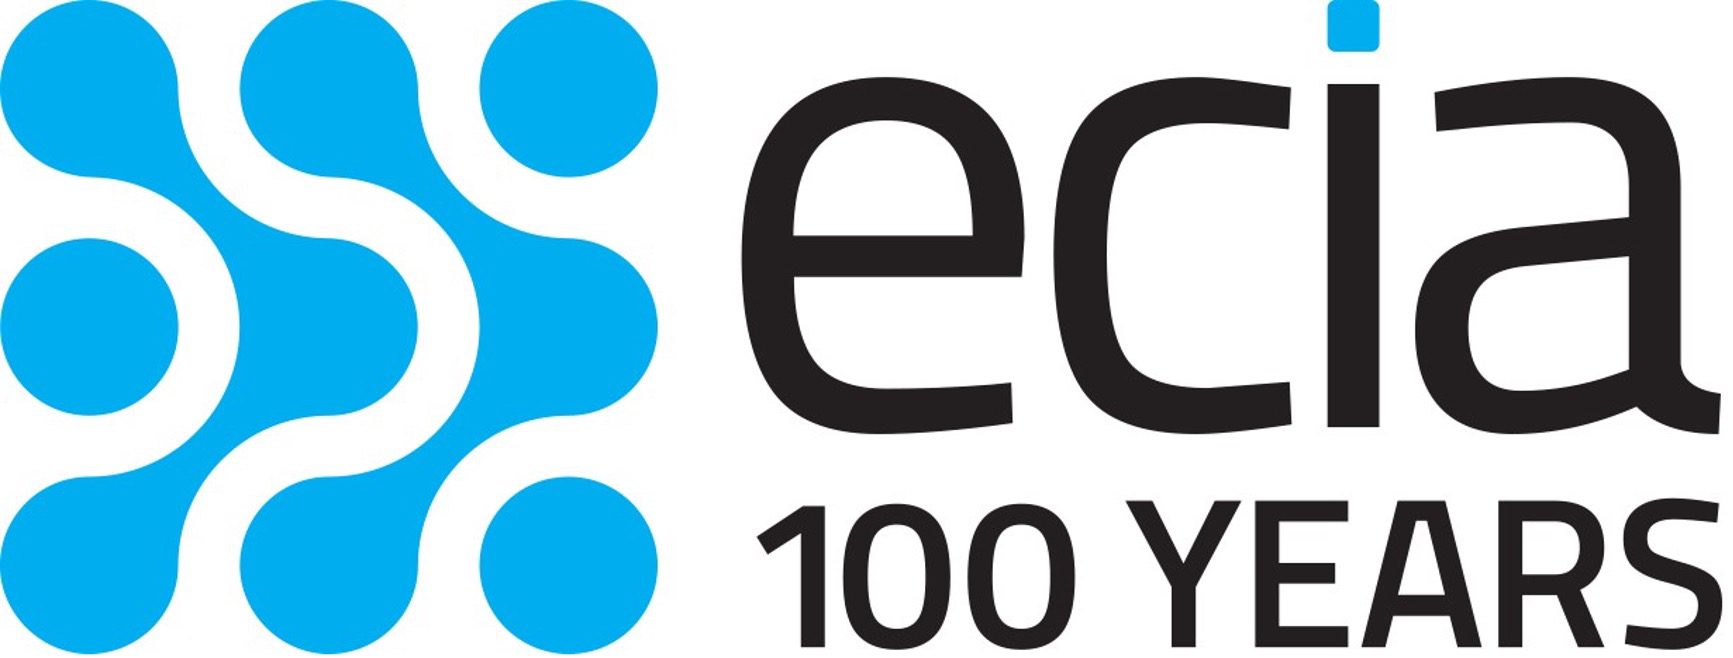 ECIA marks its 100th anniversary, tracing its roots back to the Association of Radio Manufacturers, founded in 1924.